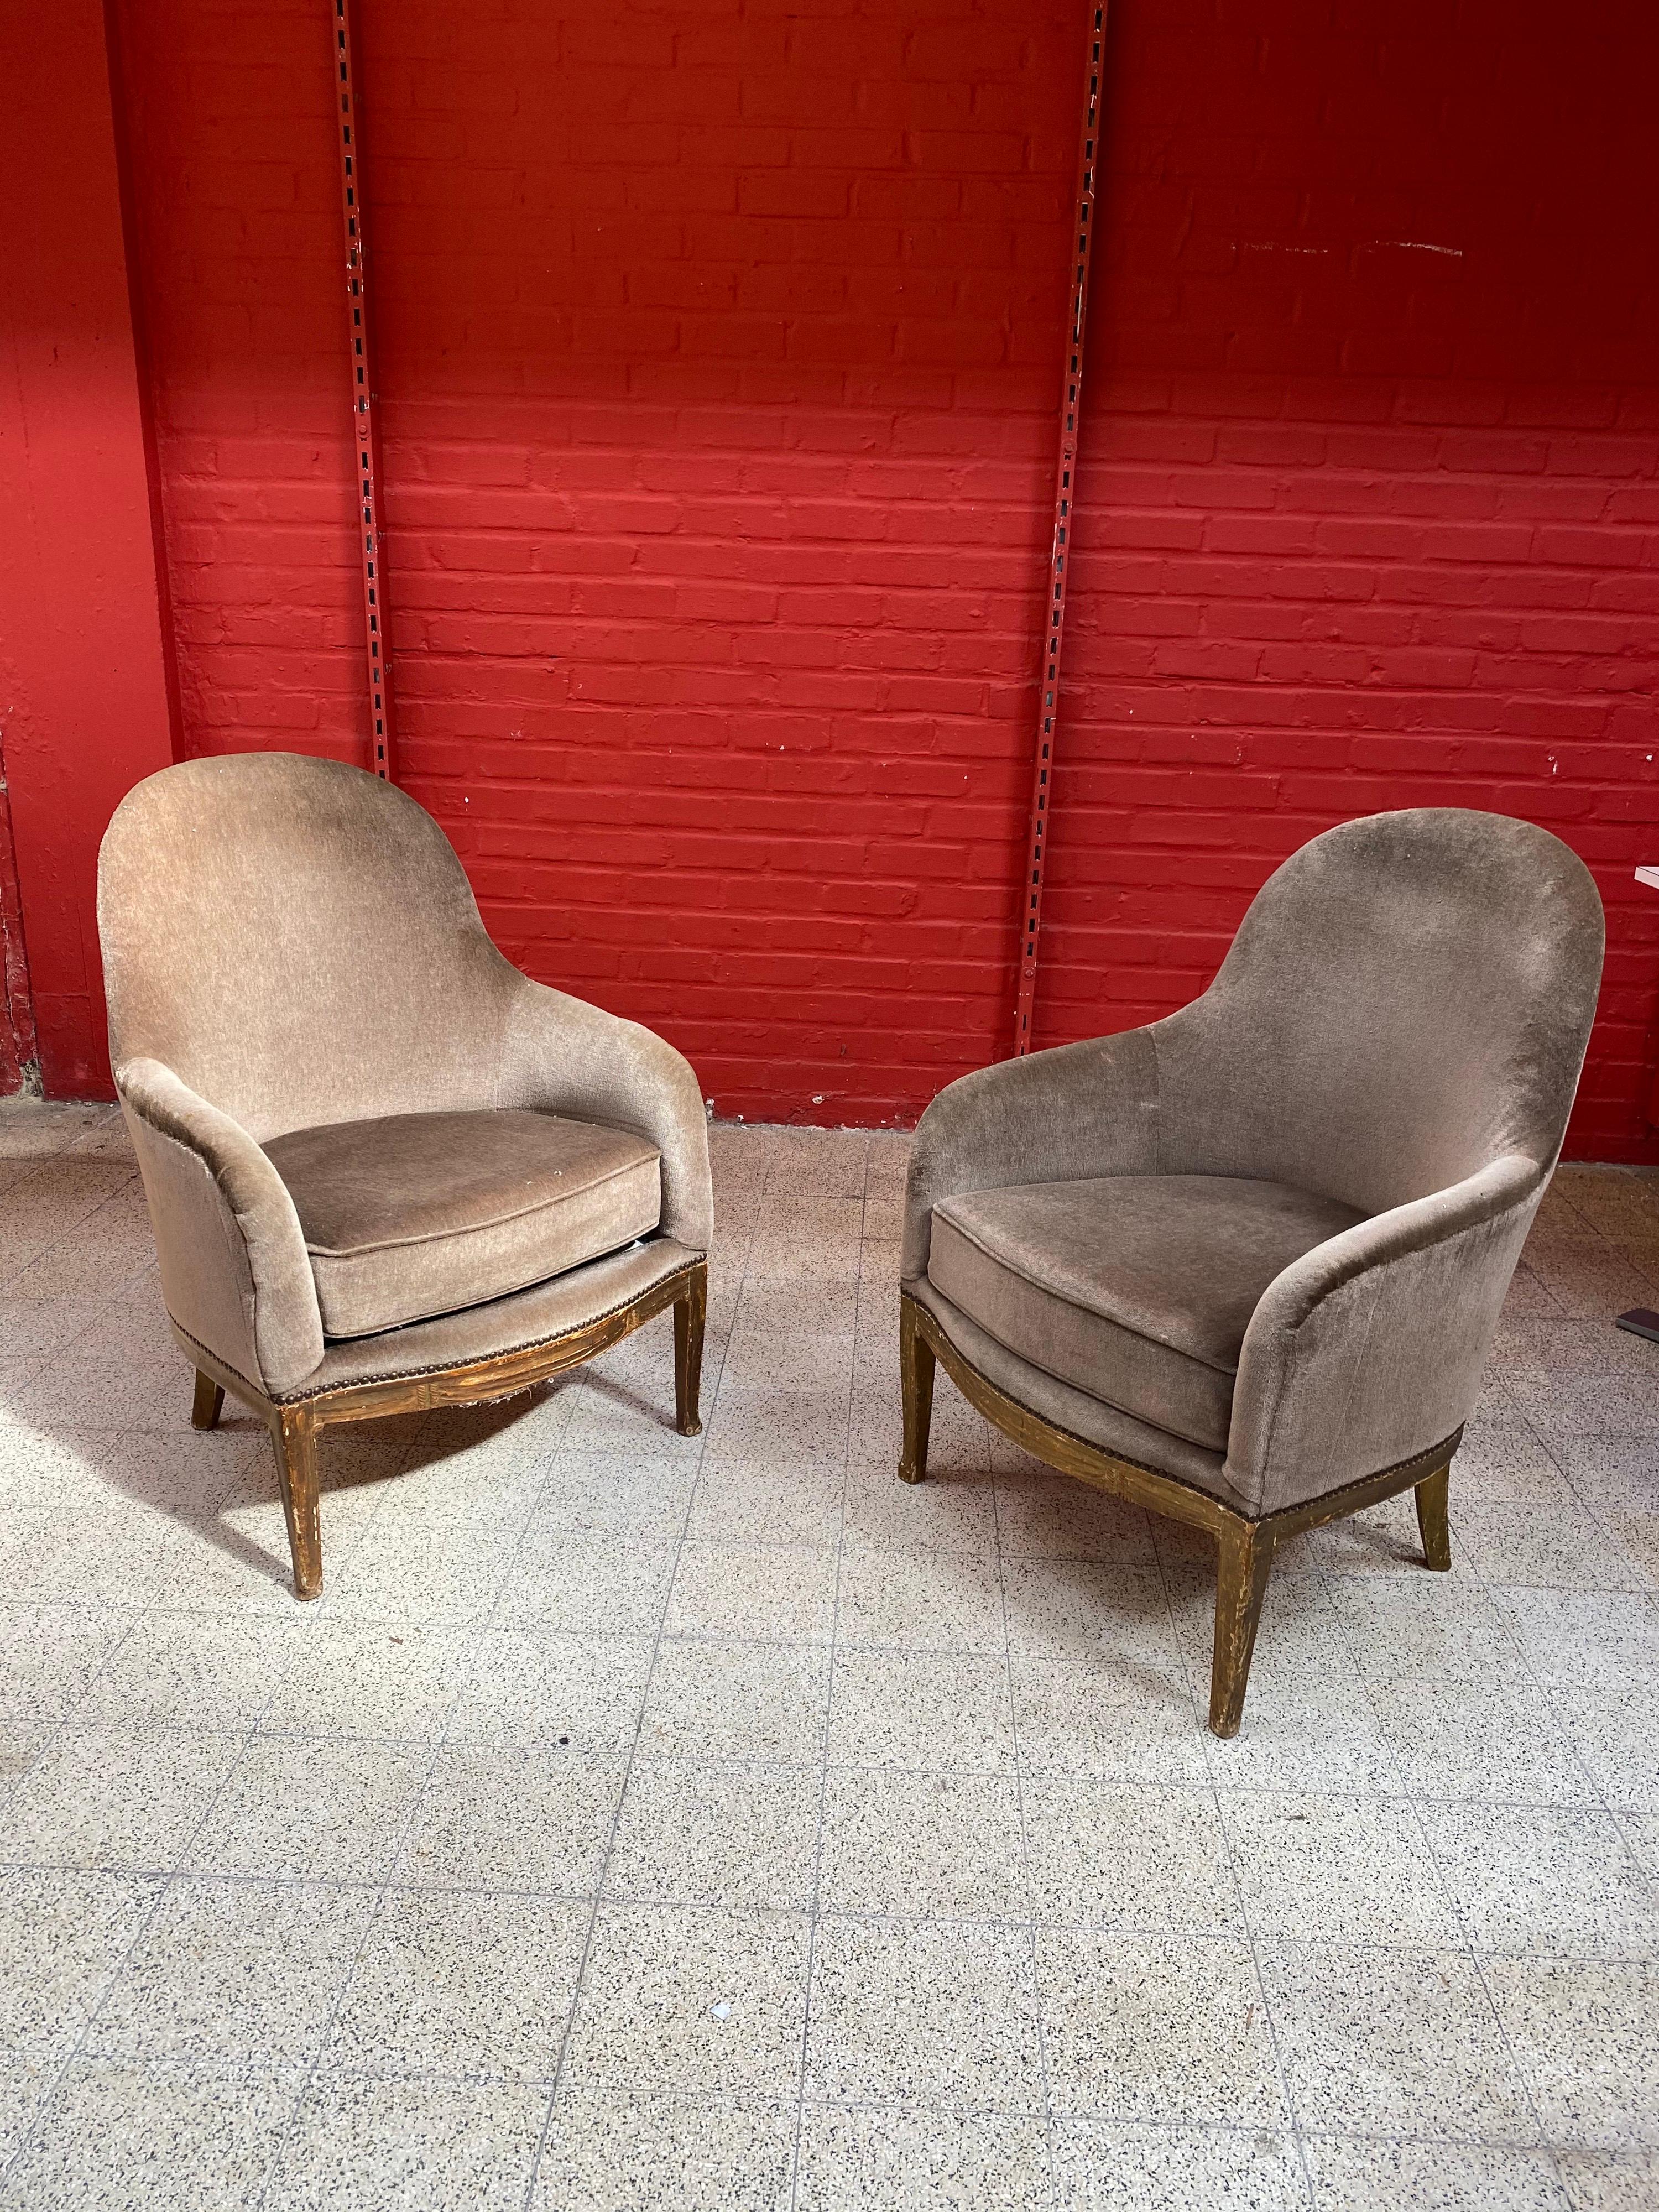 Pair of Art Deco armchairs in the style of Léon Jallot circa 1925 wood and velvet.